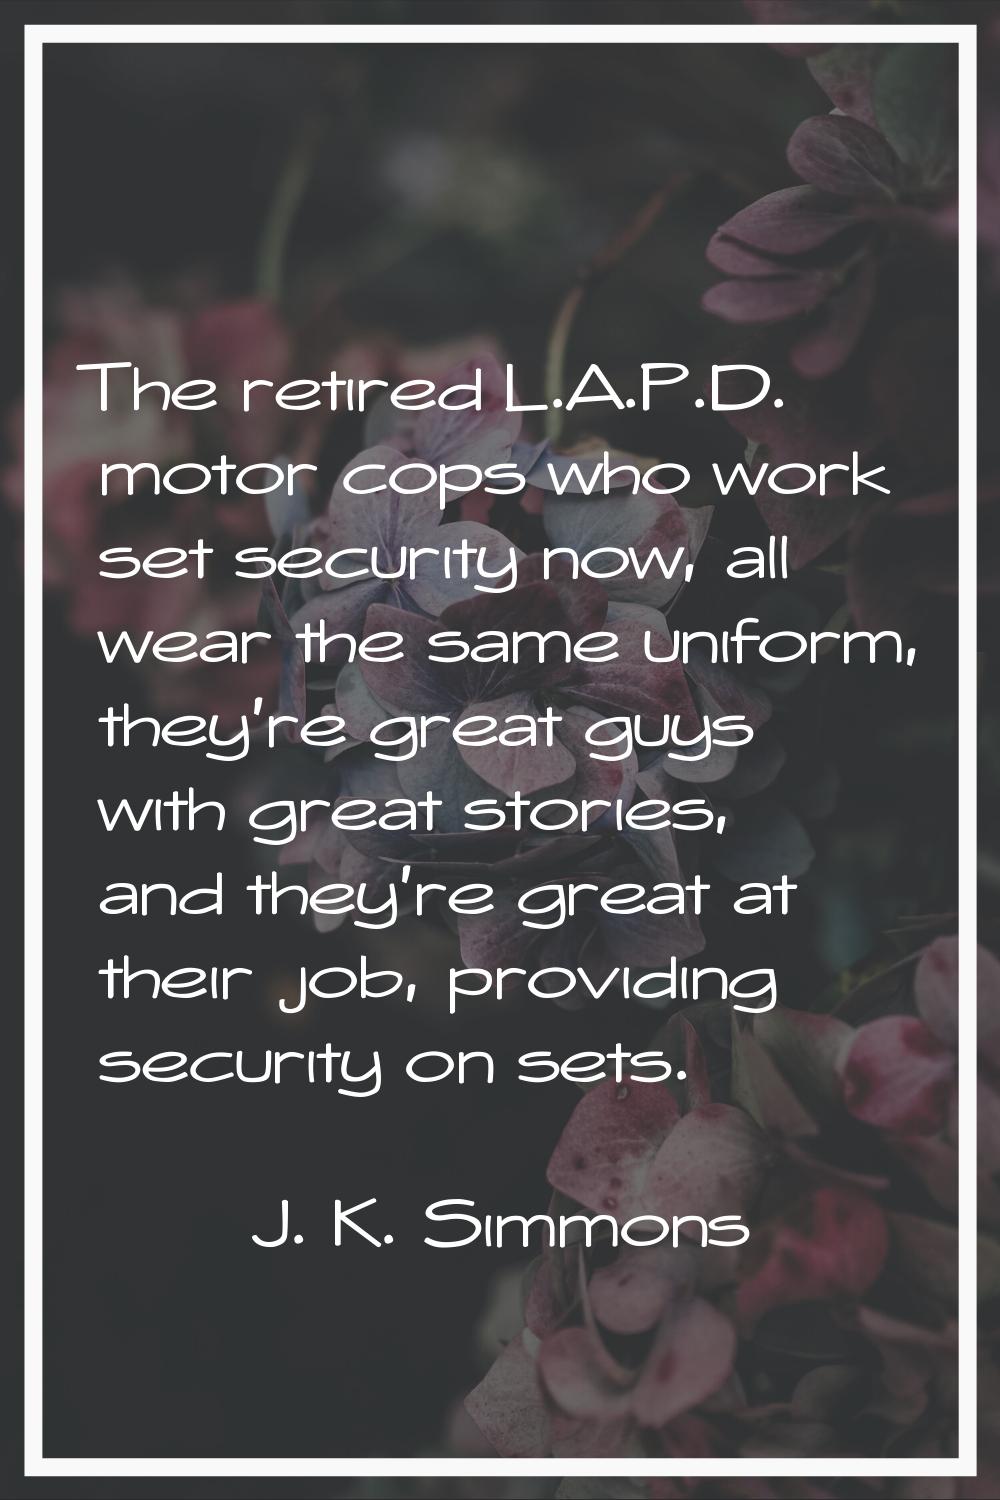 The retired L.A.P.D. motor cops who work set security now, all wear the same uniform, they're great